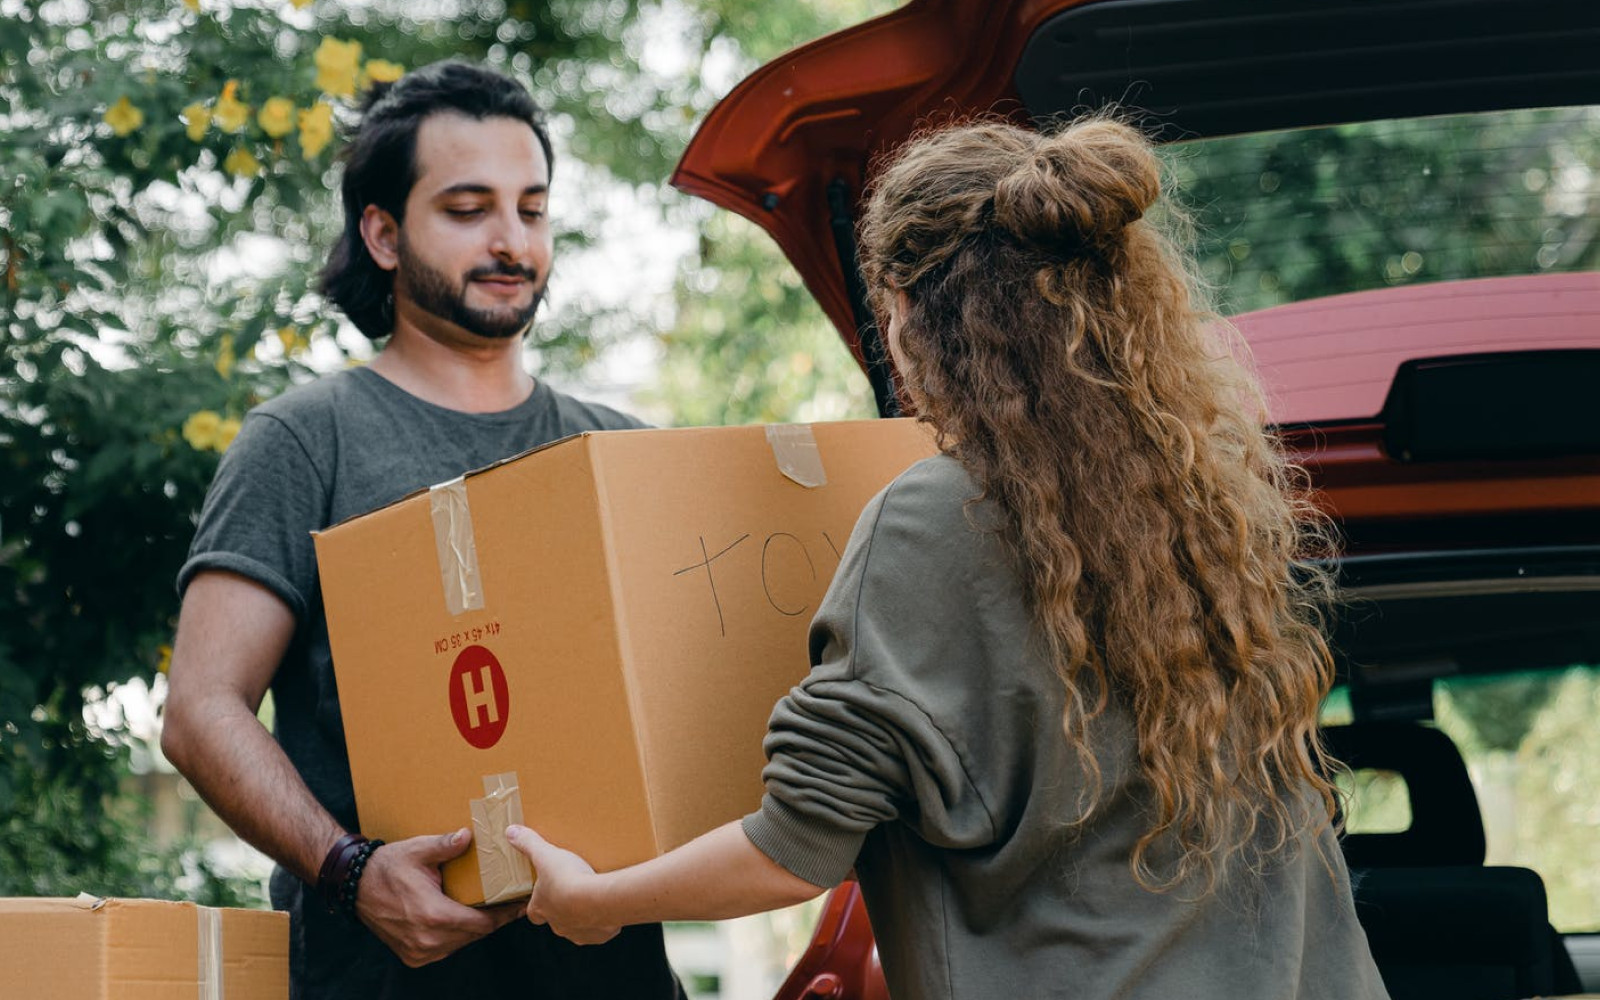 Image of renters with boxing boxes outside their car.